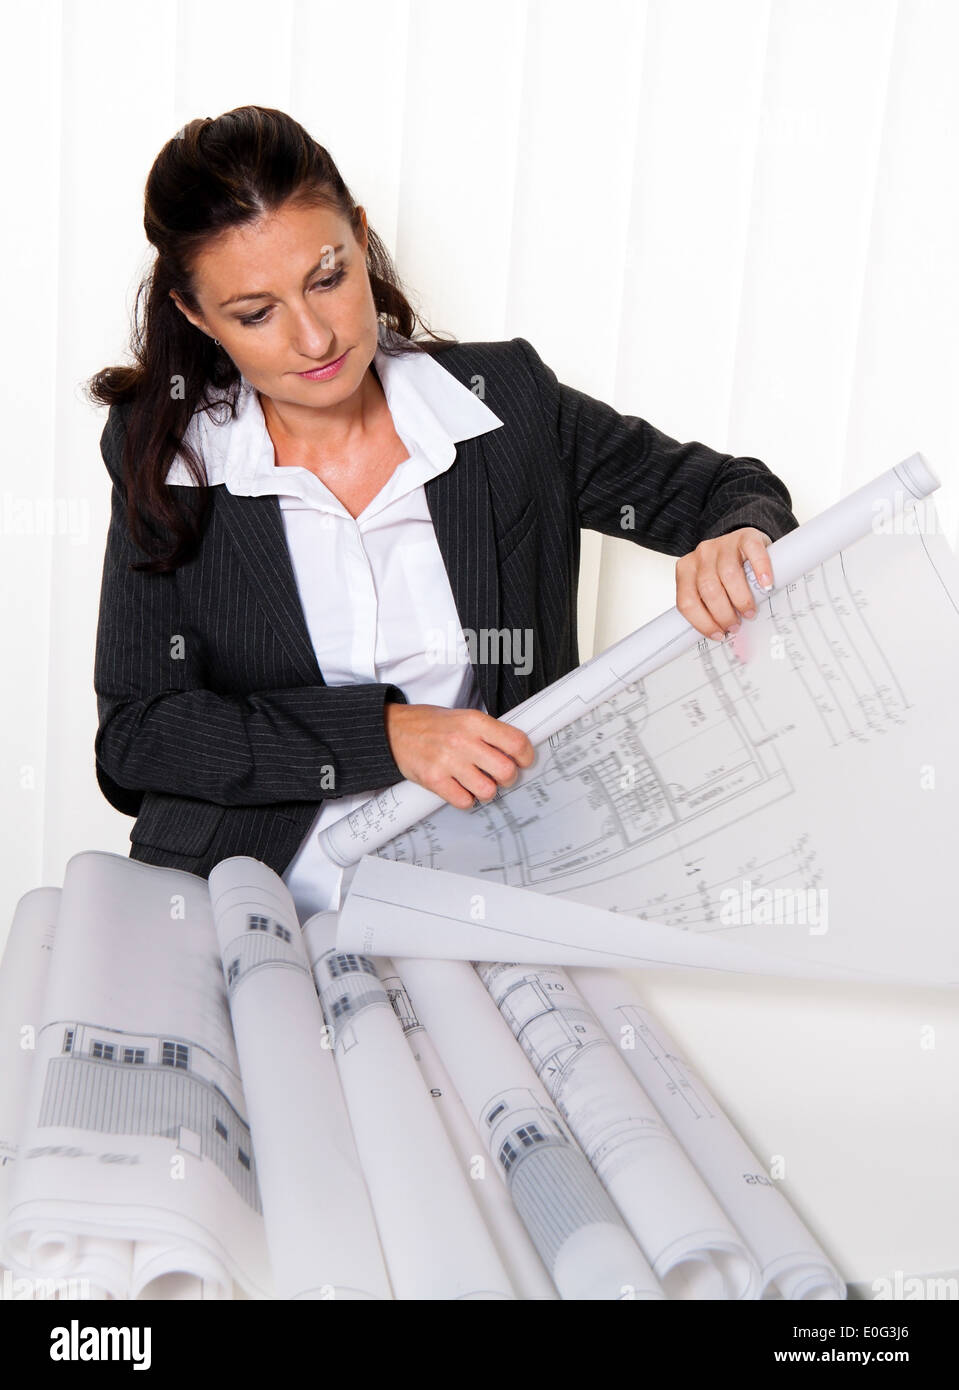 Architect with architect's plan in the office. Plans of a dwelling house are worked on, Architekt mit Bauplan im Buero. Plaene e Stock Photo